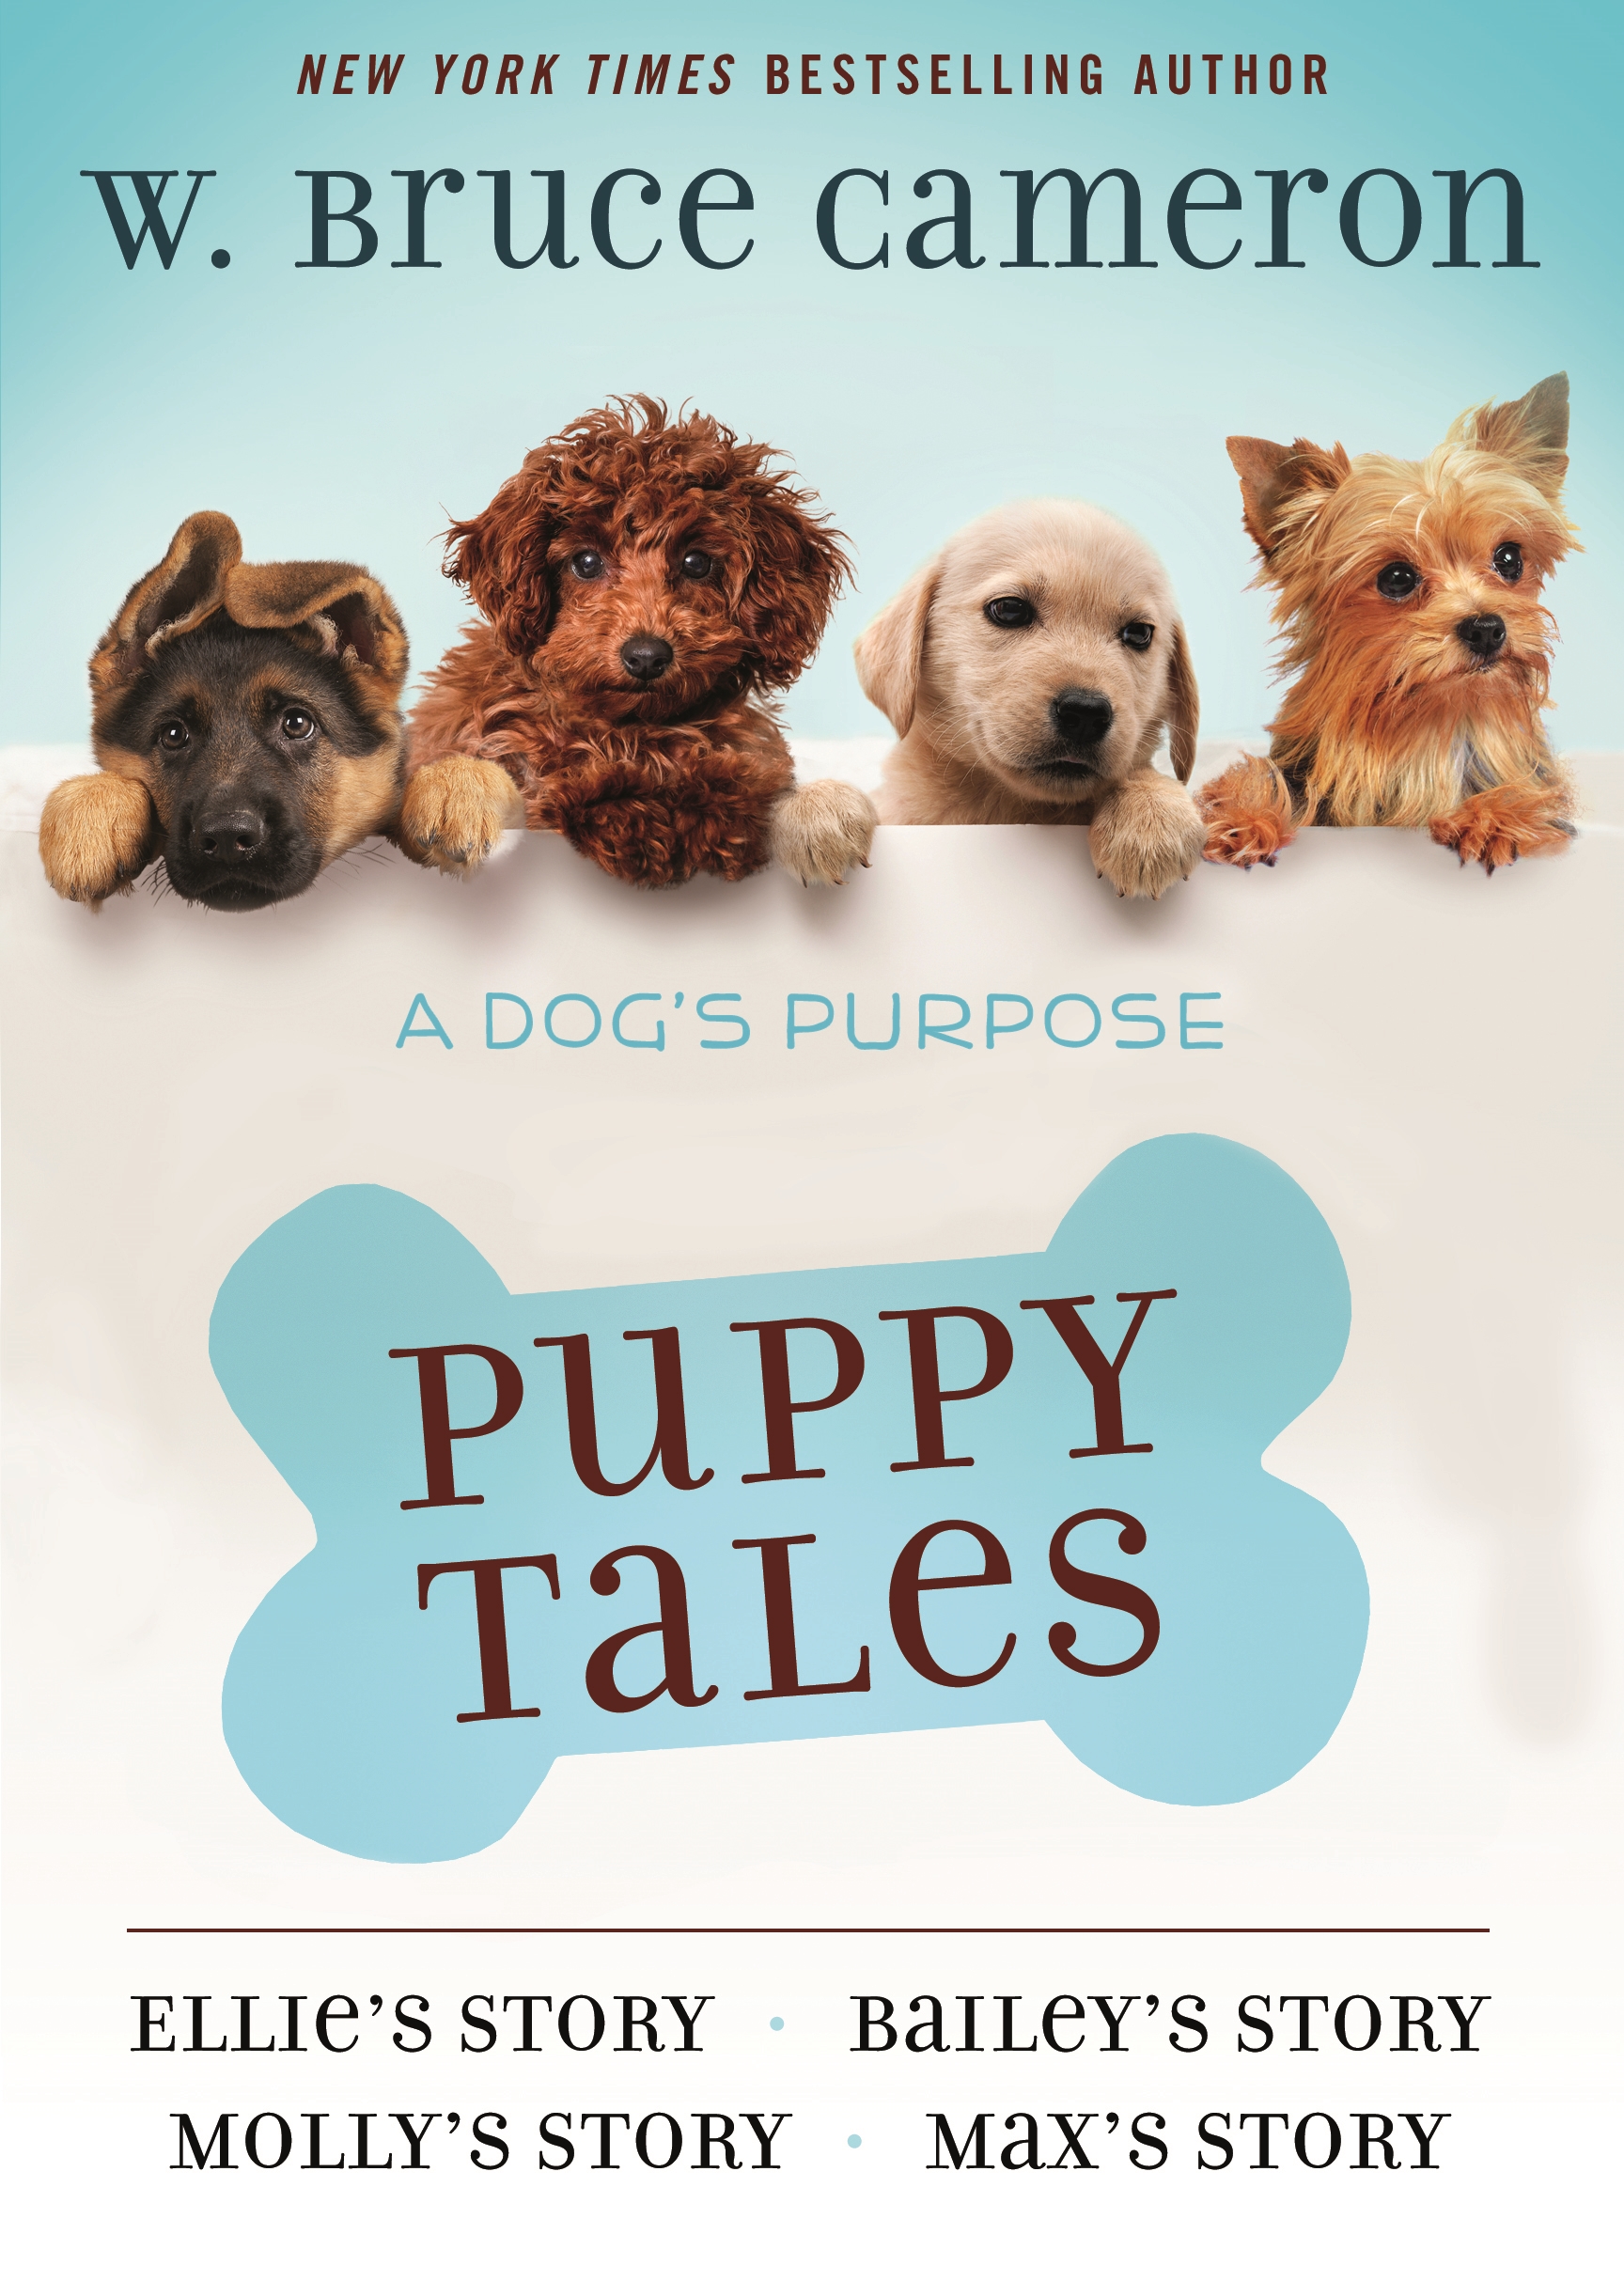 A Dog's Purpose Puppy Tales Collection : Ellie's Story, Bailey's Story, Molly's Story, Max's Story by W. Bruce Cameron